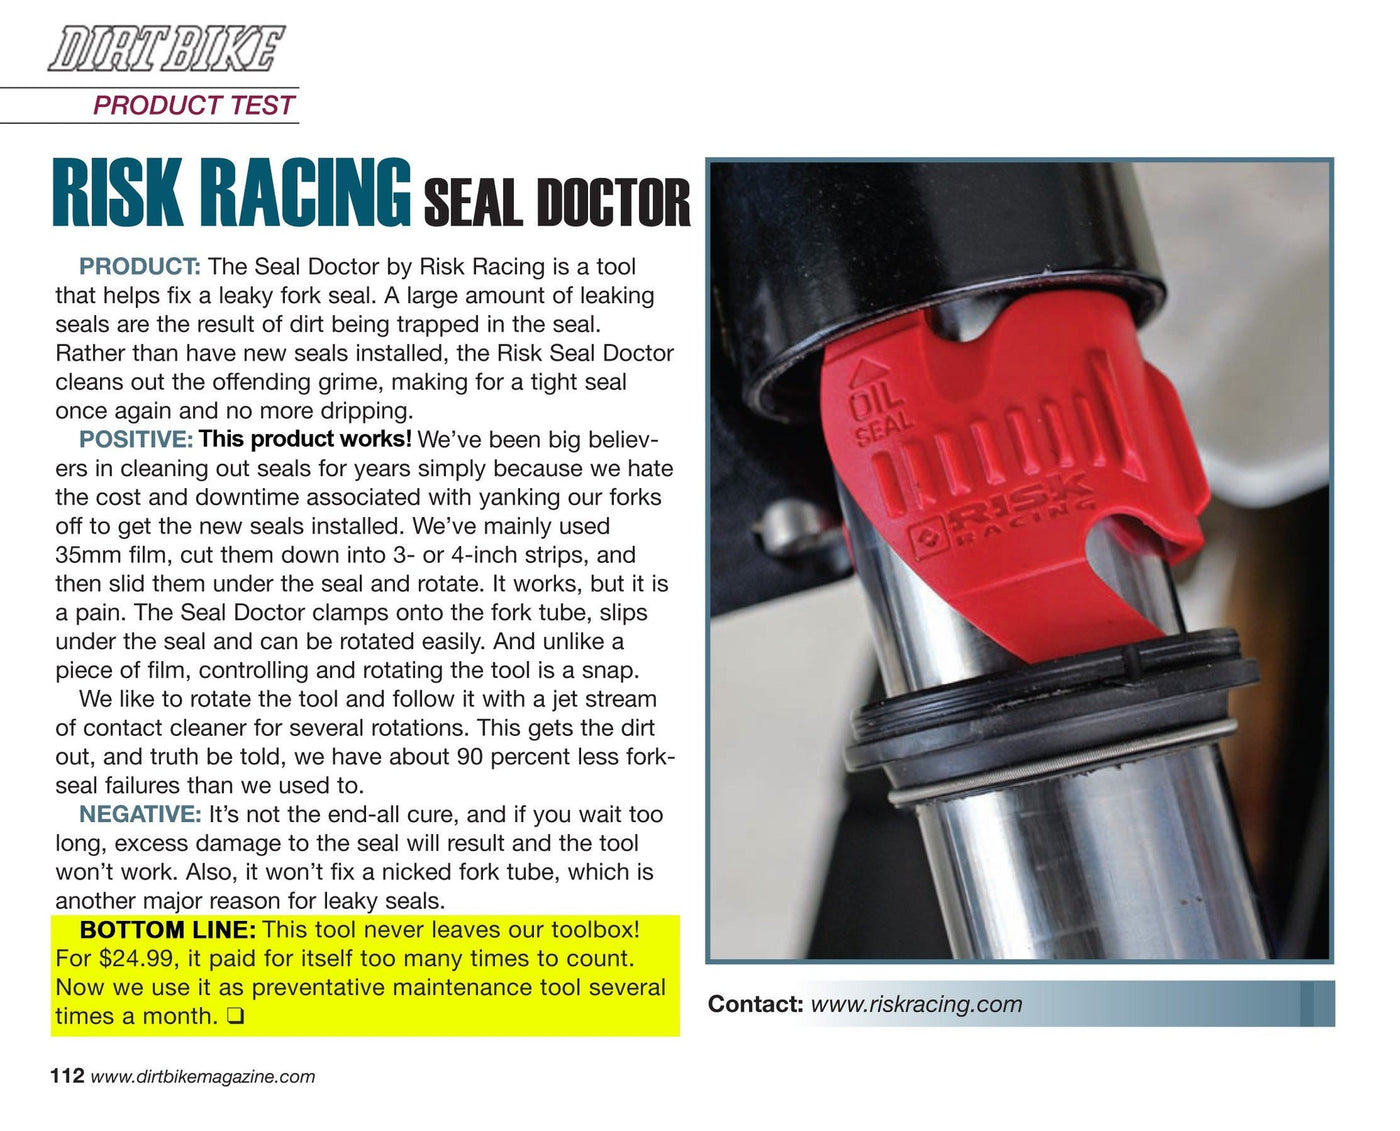 Seal Doctor - Fix Leaky Fork Seals In Seconds